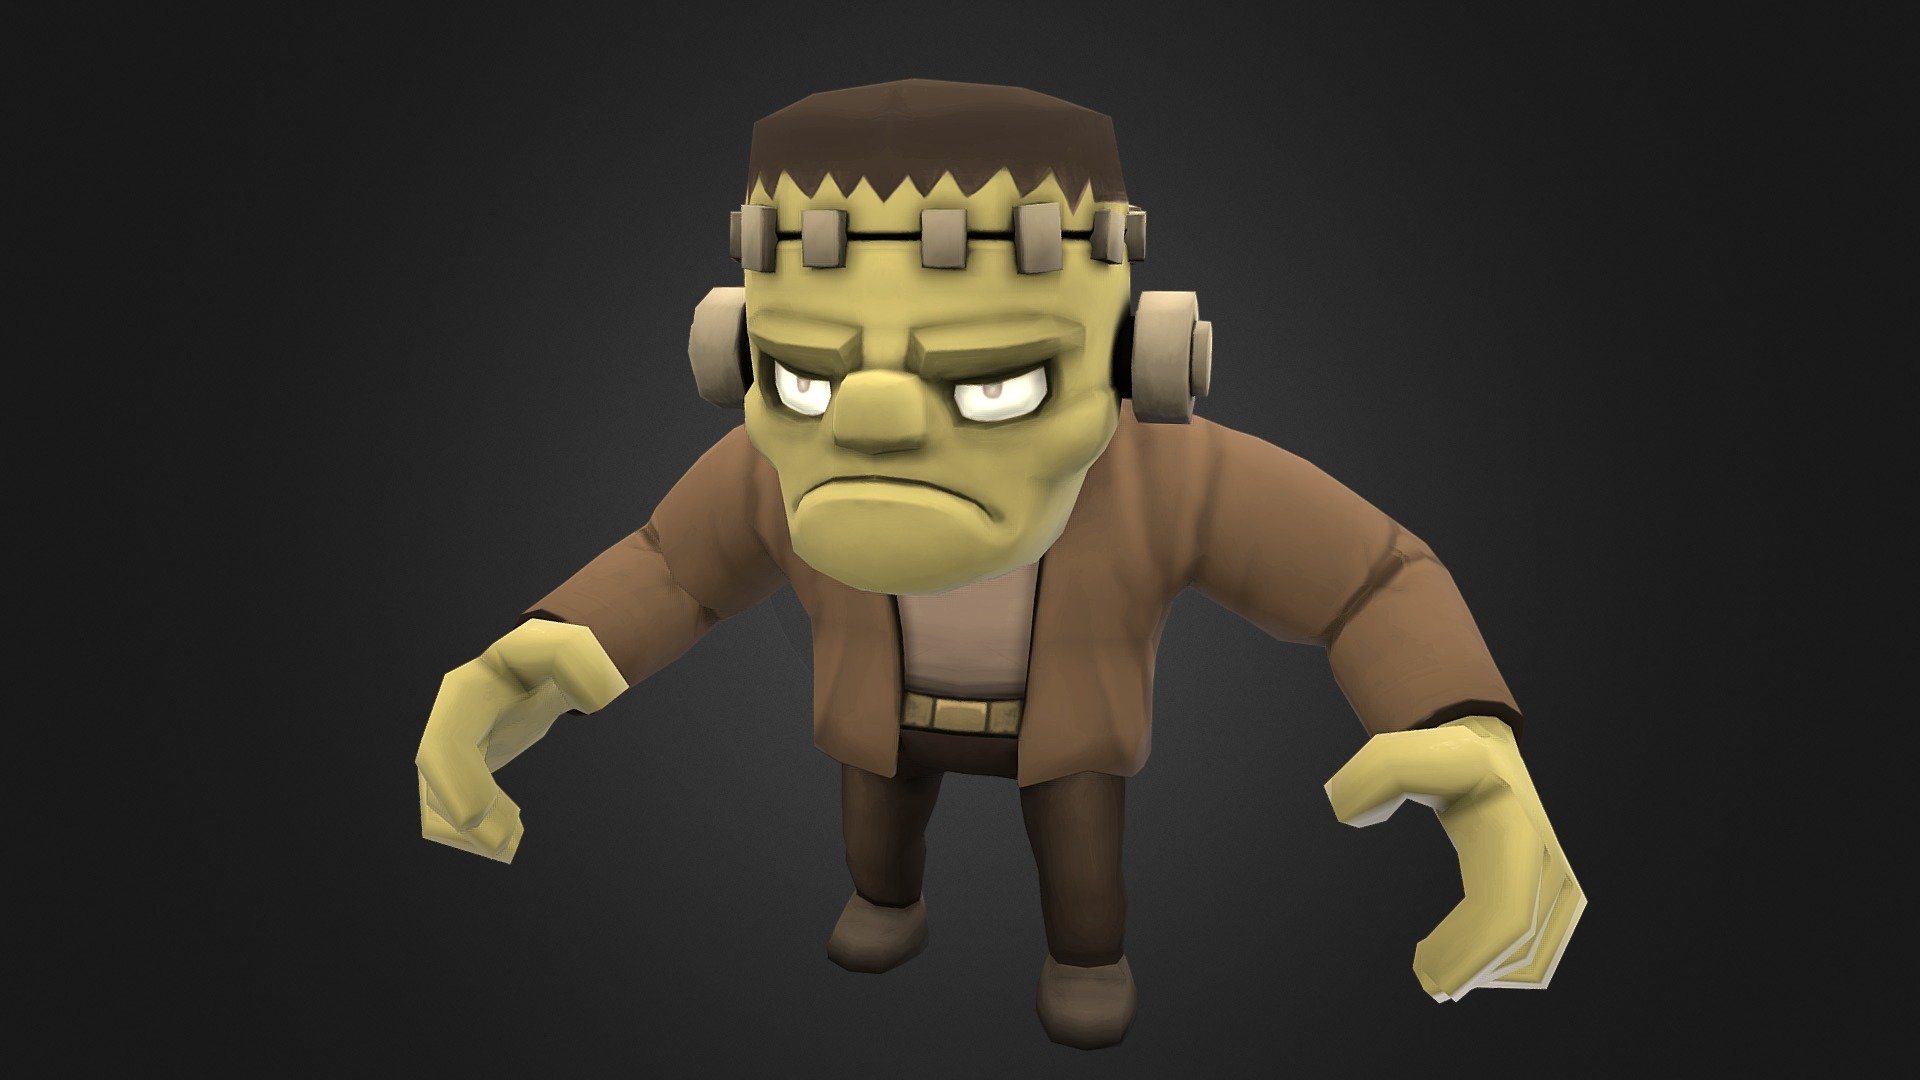 Supported Unity versions 2018.4.8 or higher

Frankenstein (1600 vertex)

3 colors textures 2048x2048 png

6 basic animations

Idle / Move / Attack x2 / Damage / Die

Animation Preview
https://youtu.be/77x66nx4ipI - Poly HP - Frankenstein - Buy Royalty Free 3D model by Downrain DC (@downraindc3d) 3d model